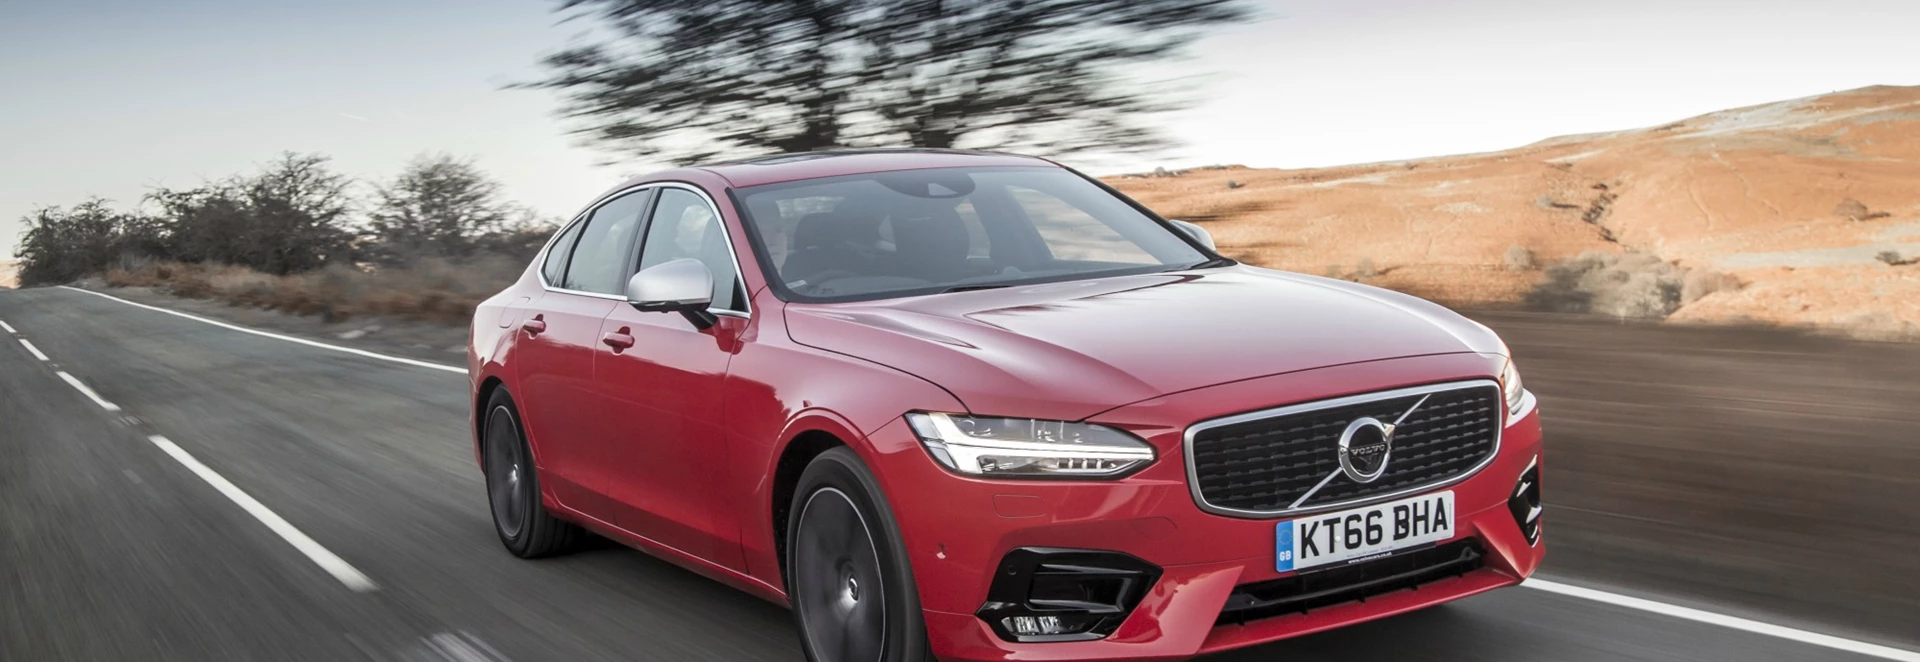 Volvo S90 D4 R-Design saloon review 